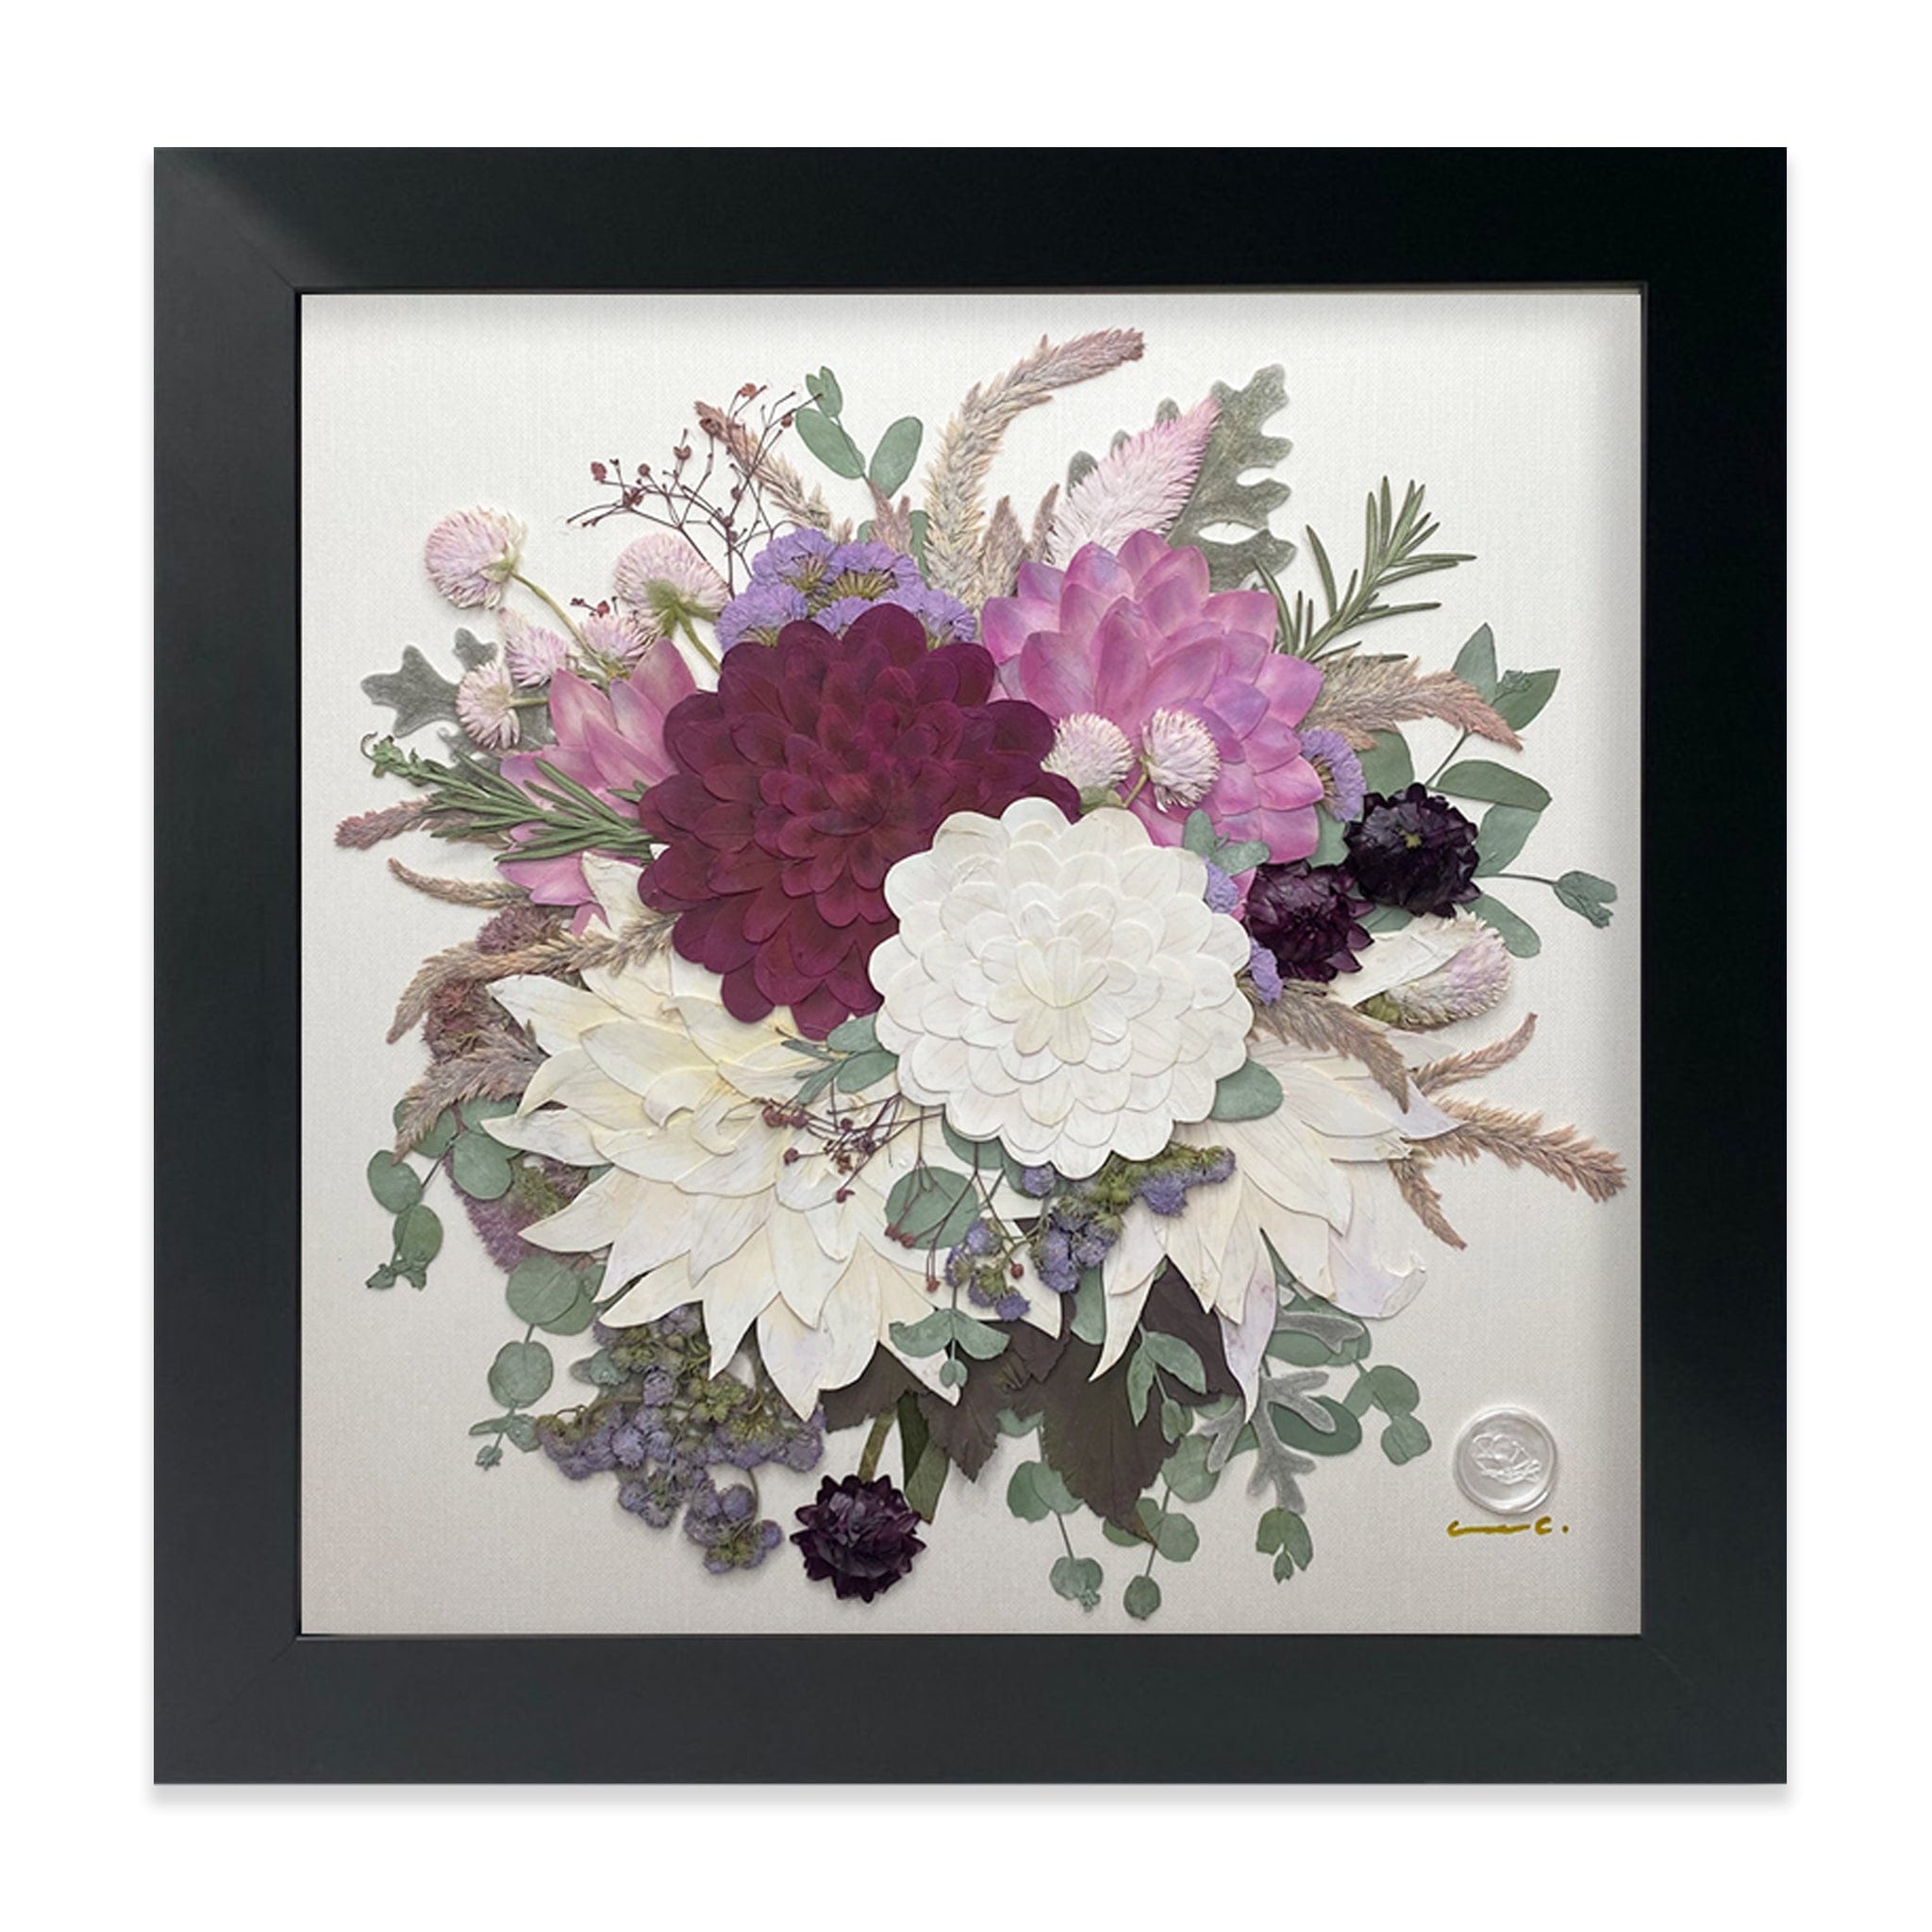 Designs by Andrea Pressed (Framed) 12" x 12" / Square / Medium 12" x 12" Classic Frame